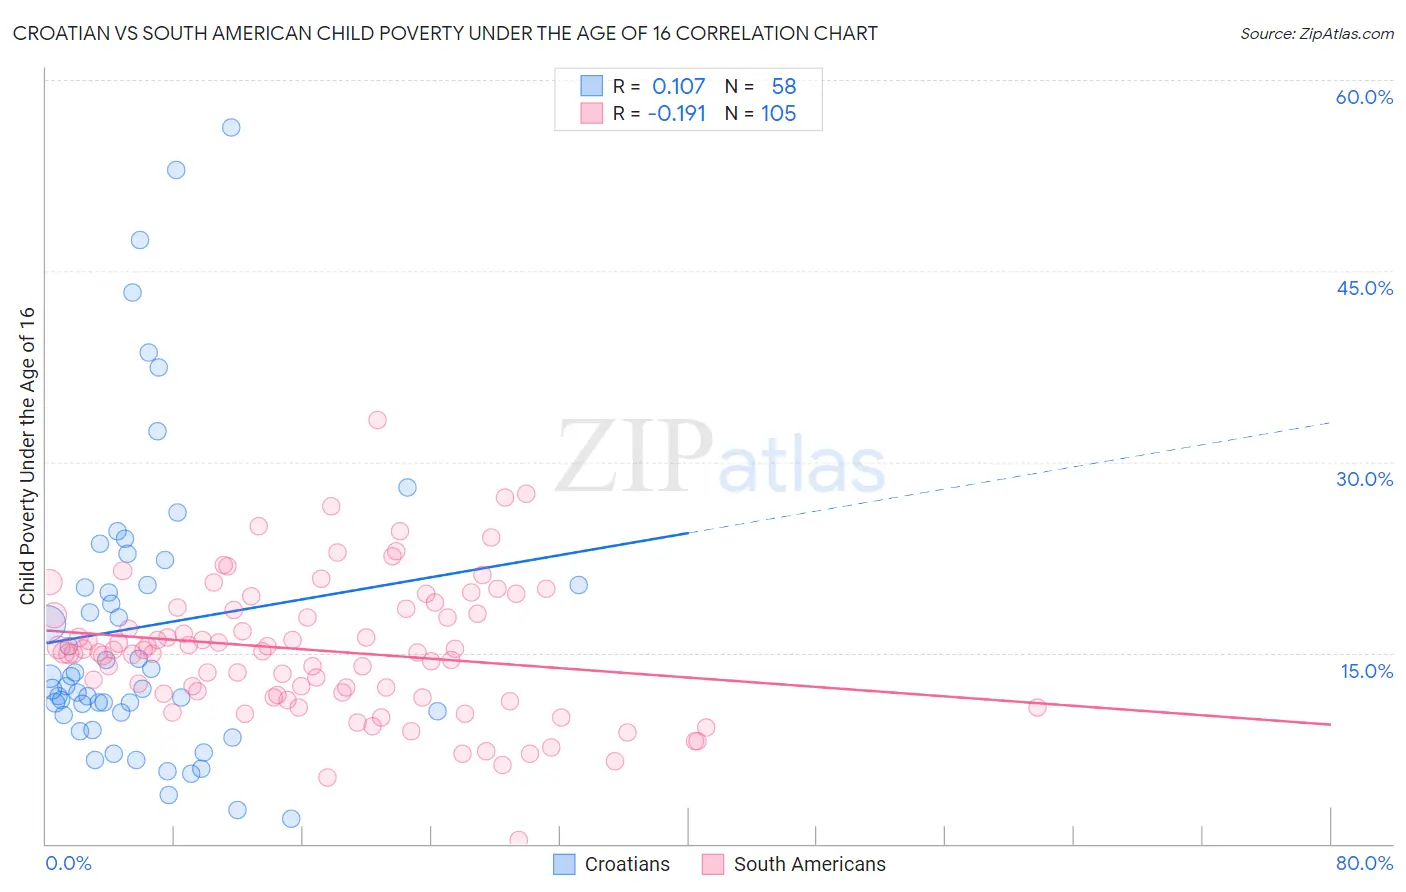 Croatian vs South American Child Poverty Under the Age of 16